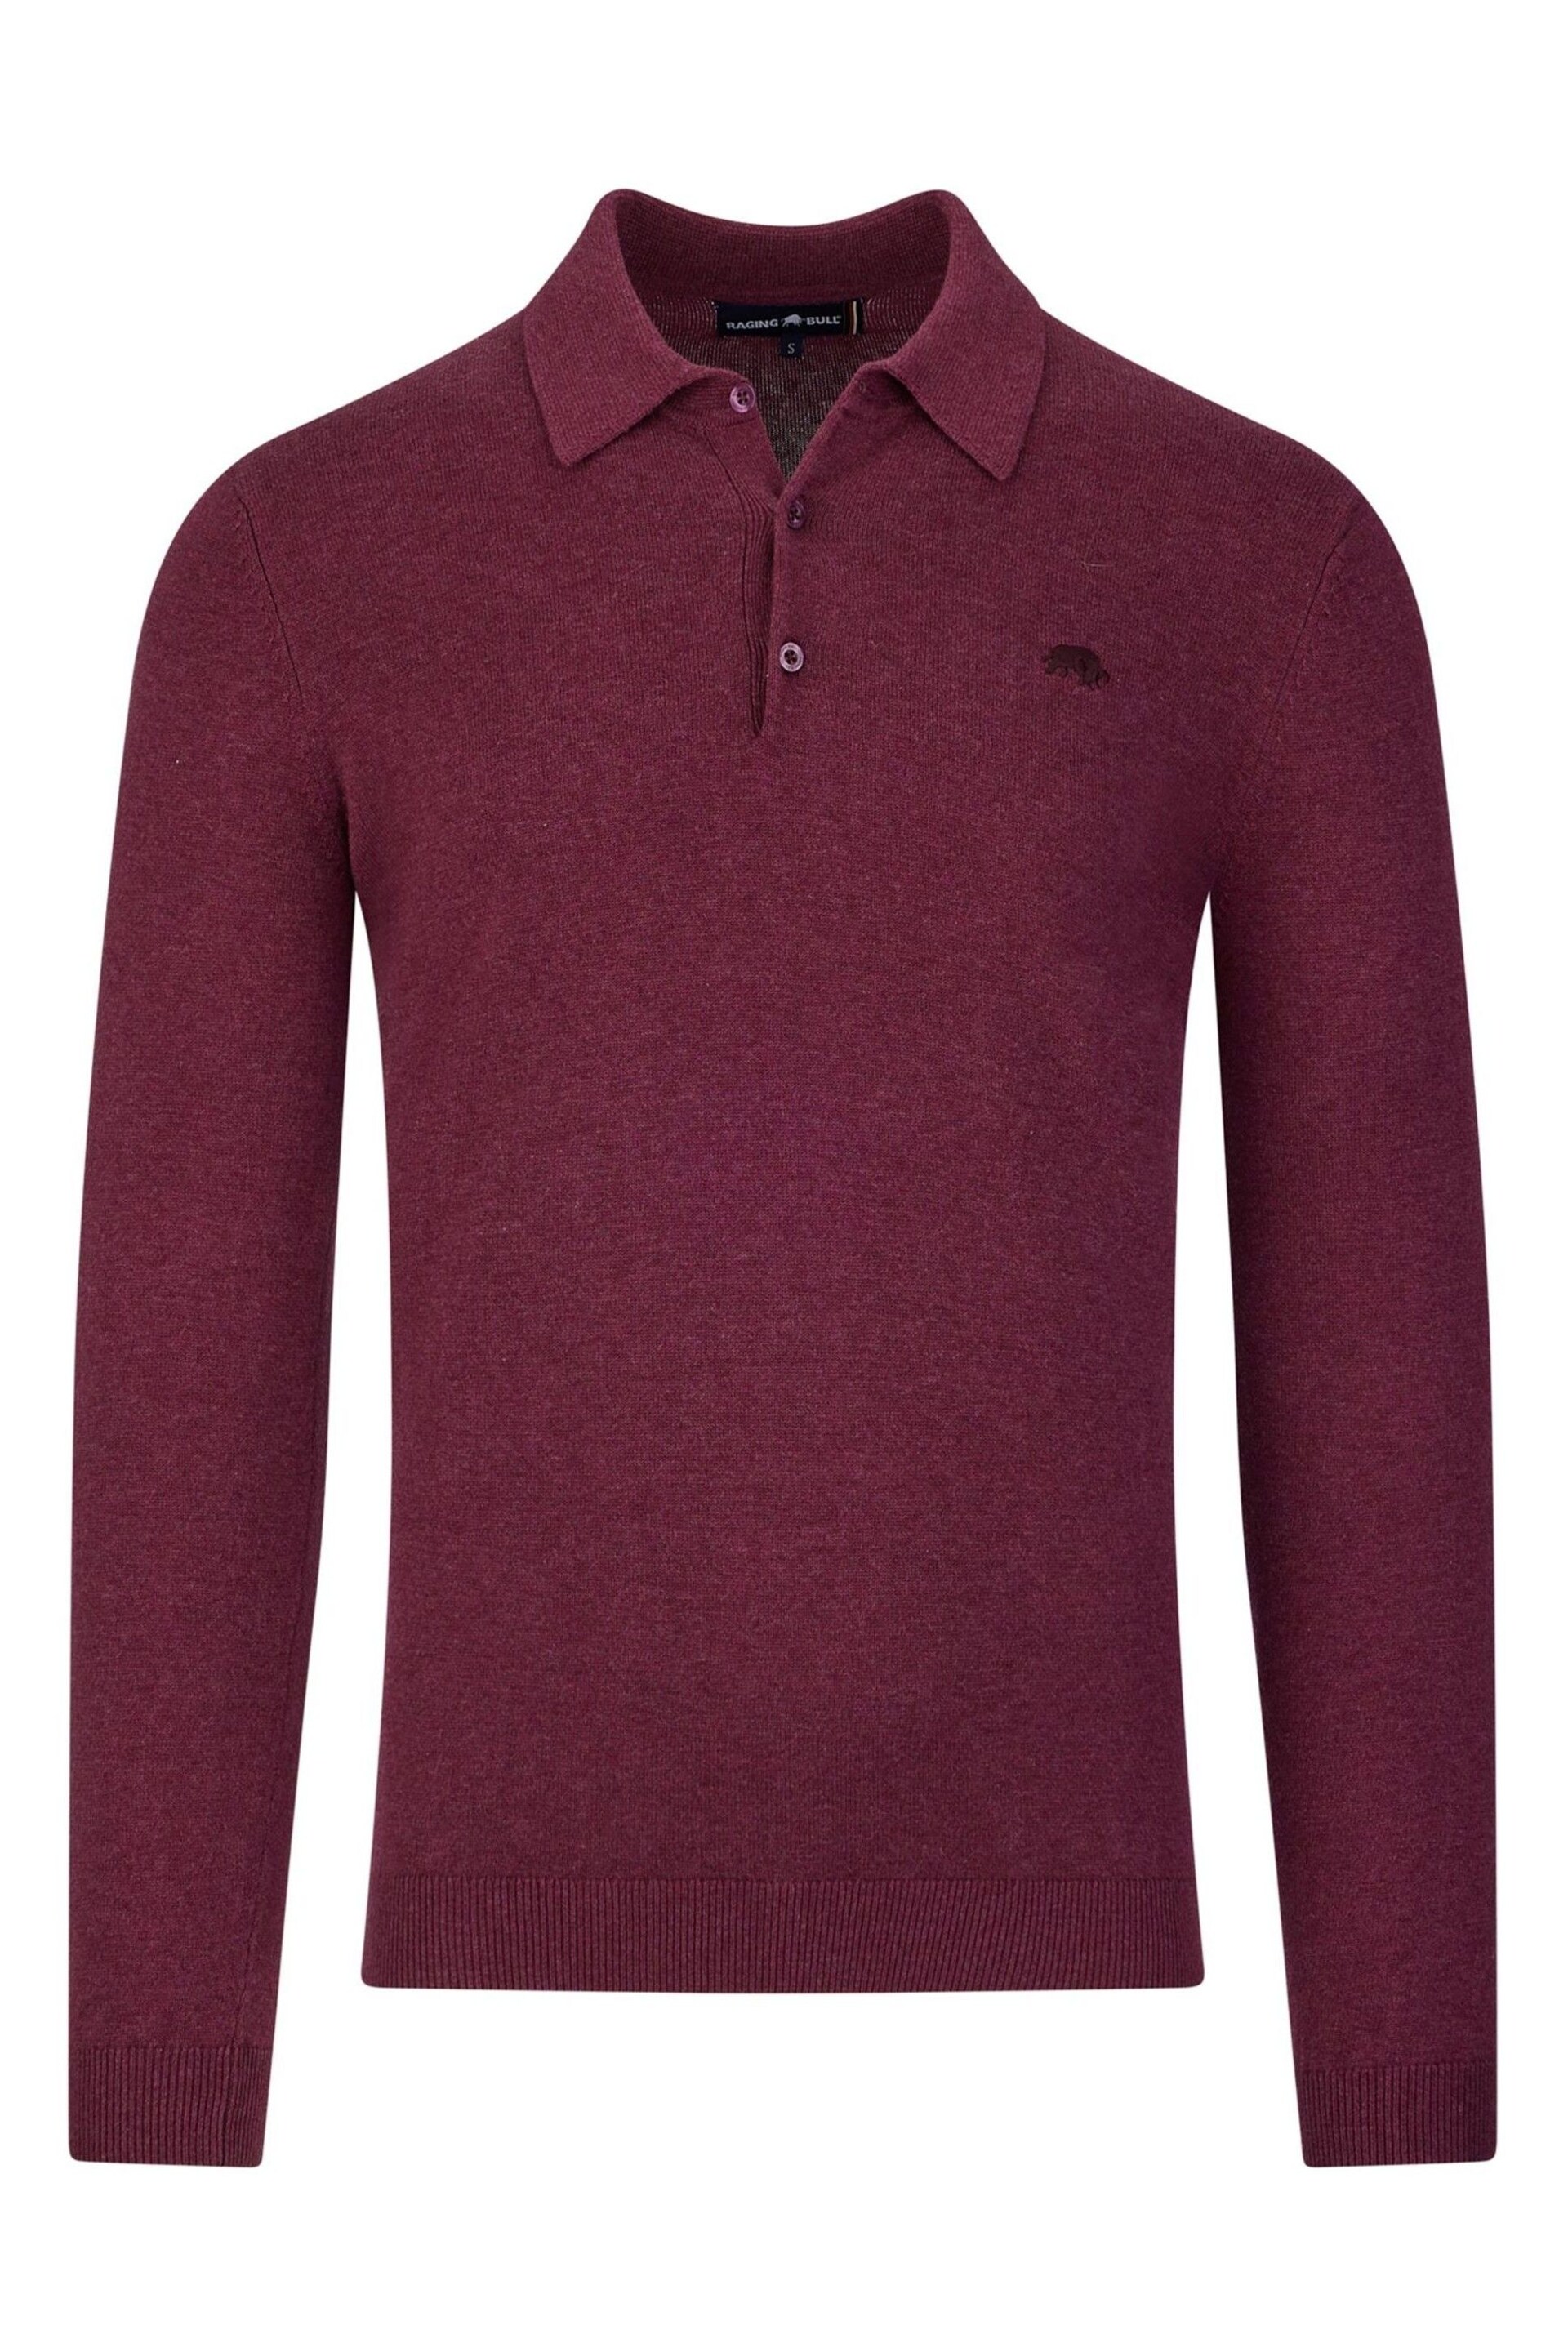 Raging Bull Long Sleeve Knitted Polo - Image 5 of 6